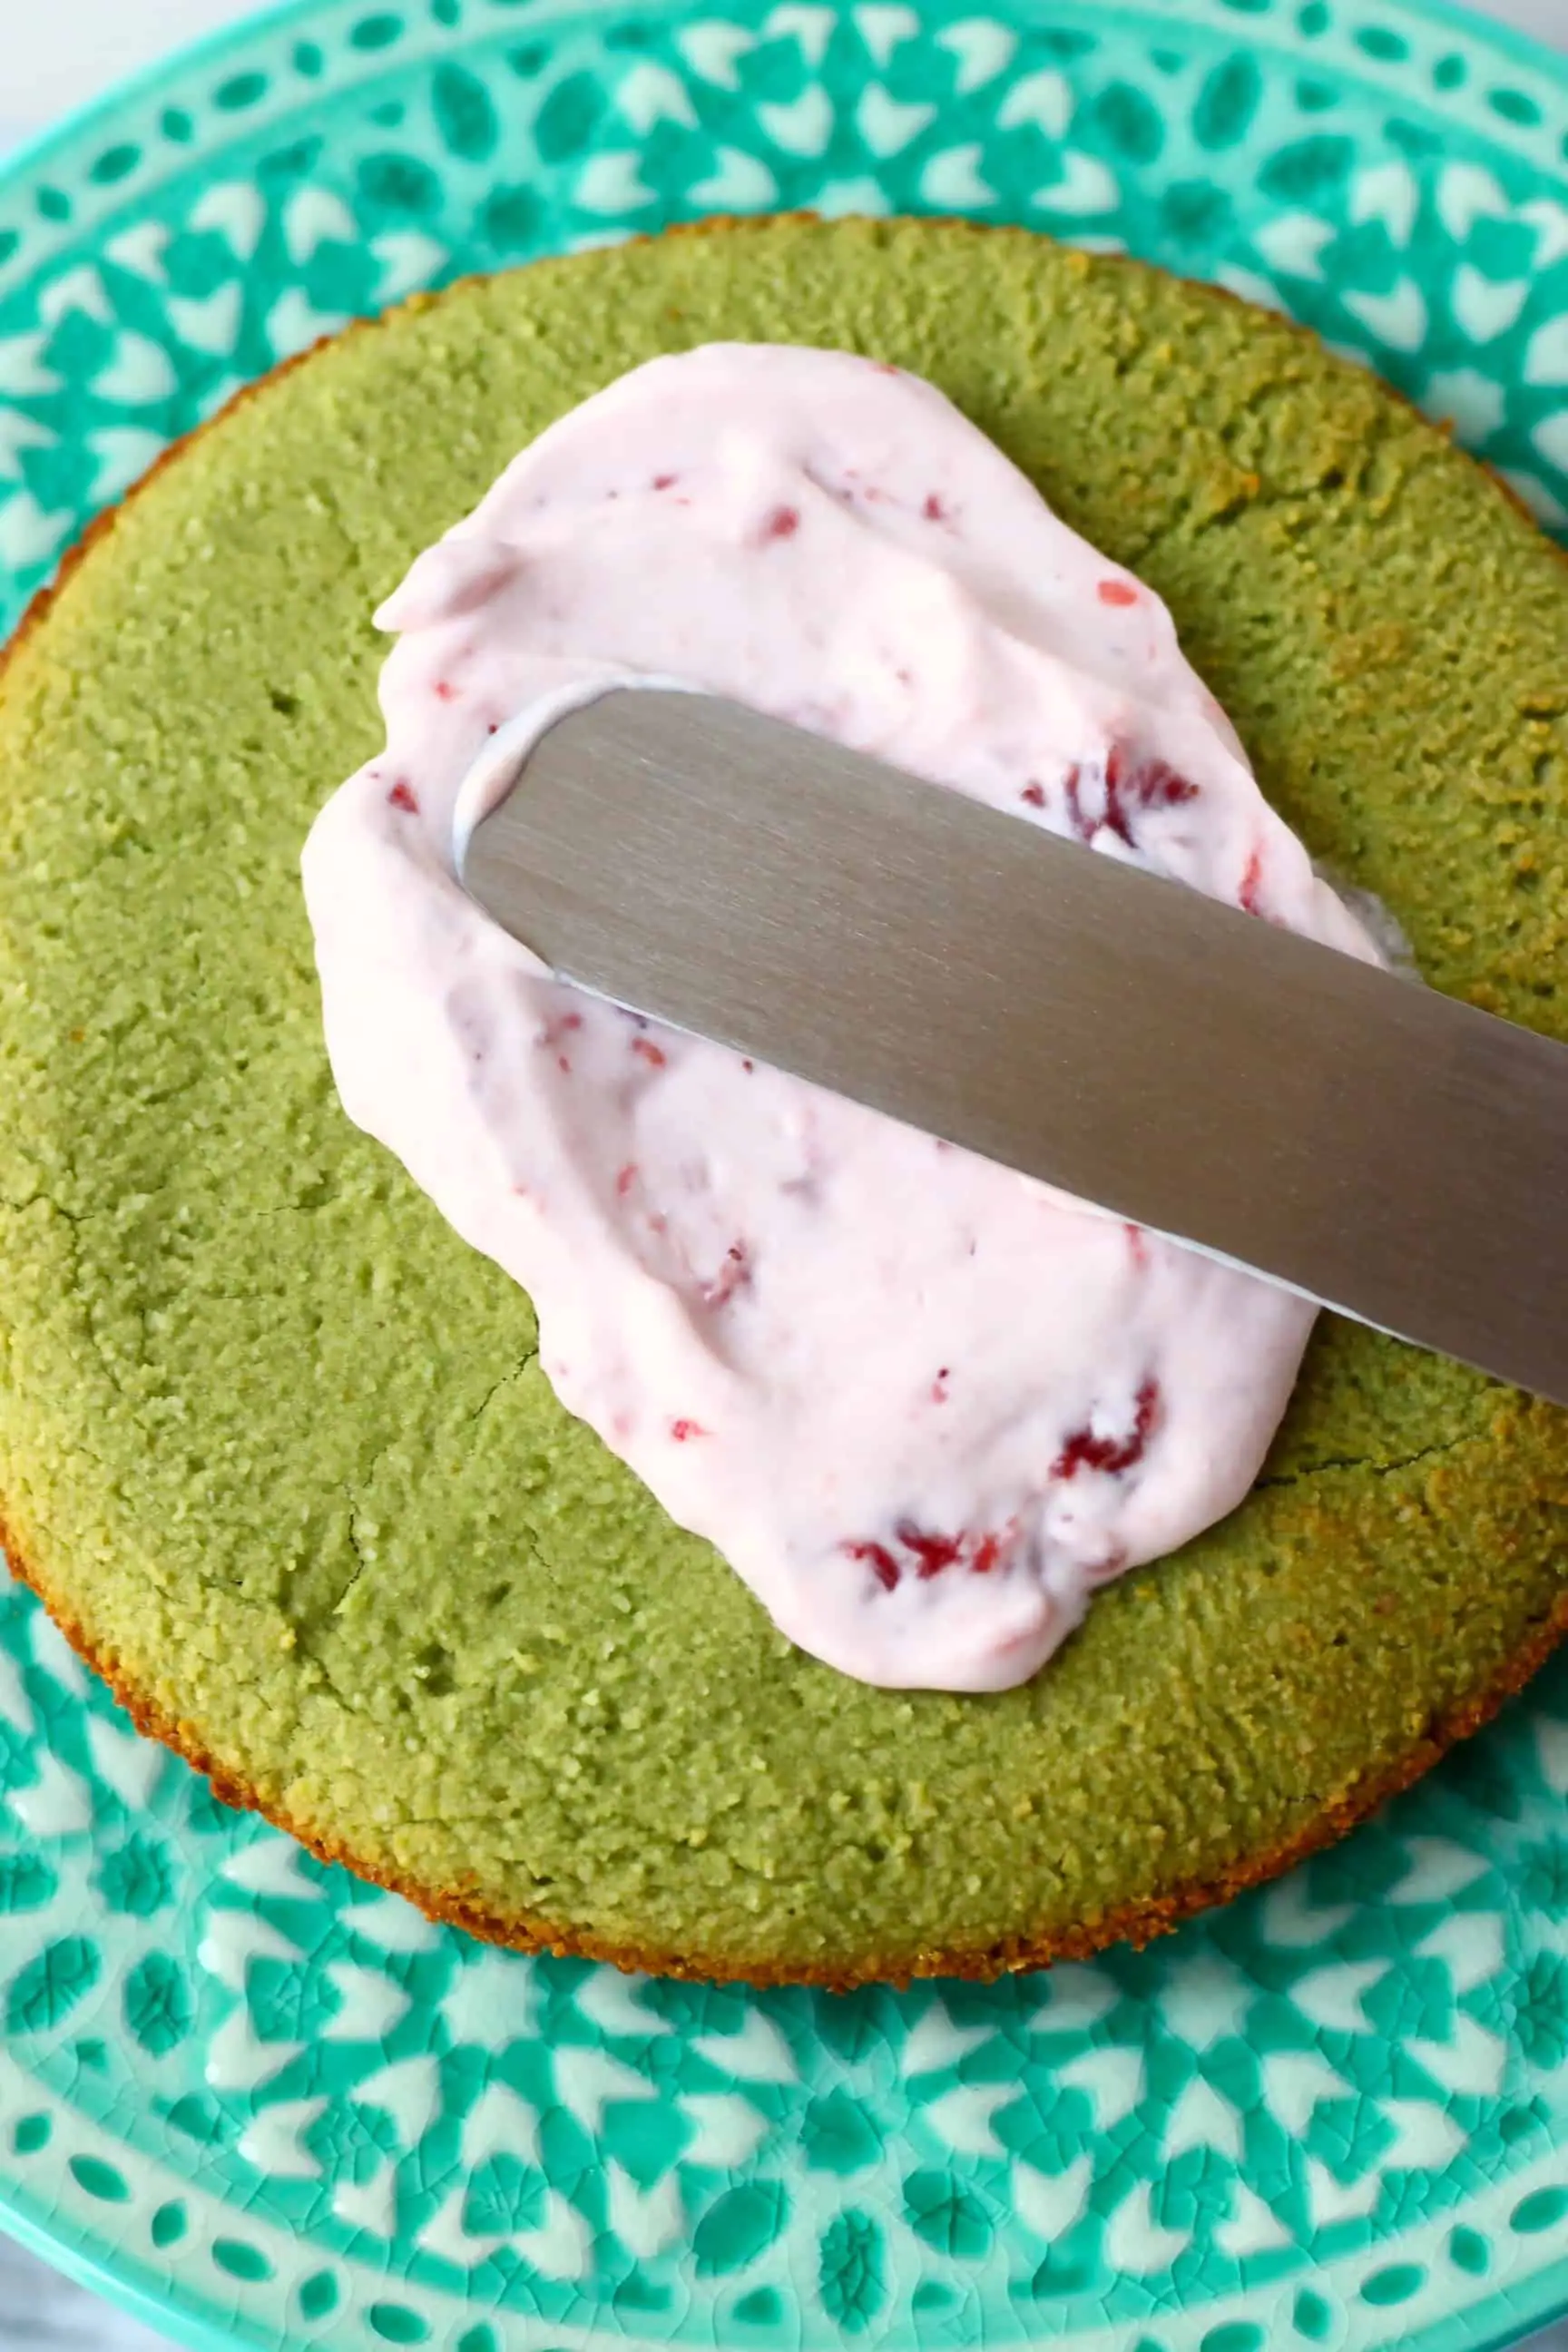 A gluten-free vegan matcha sponge with strawberry frosting being spread on it using a palette knife